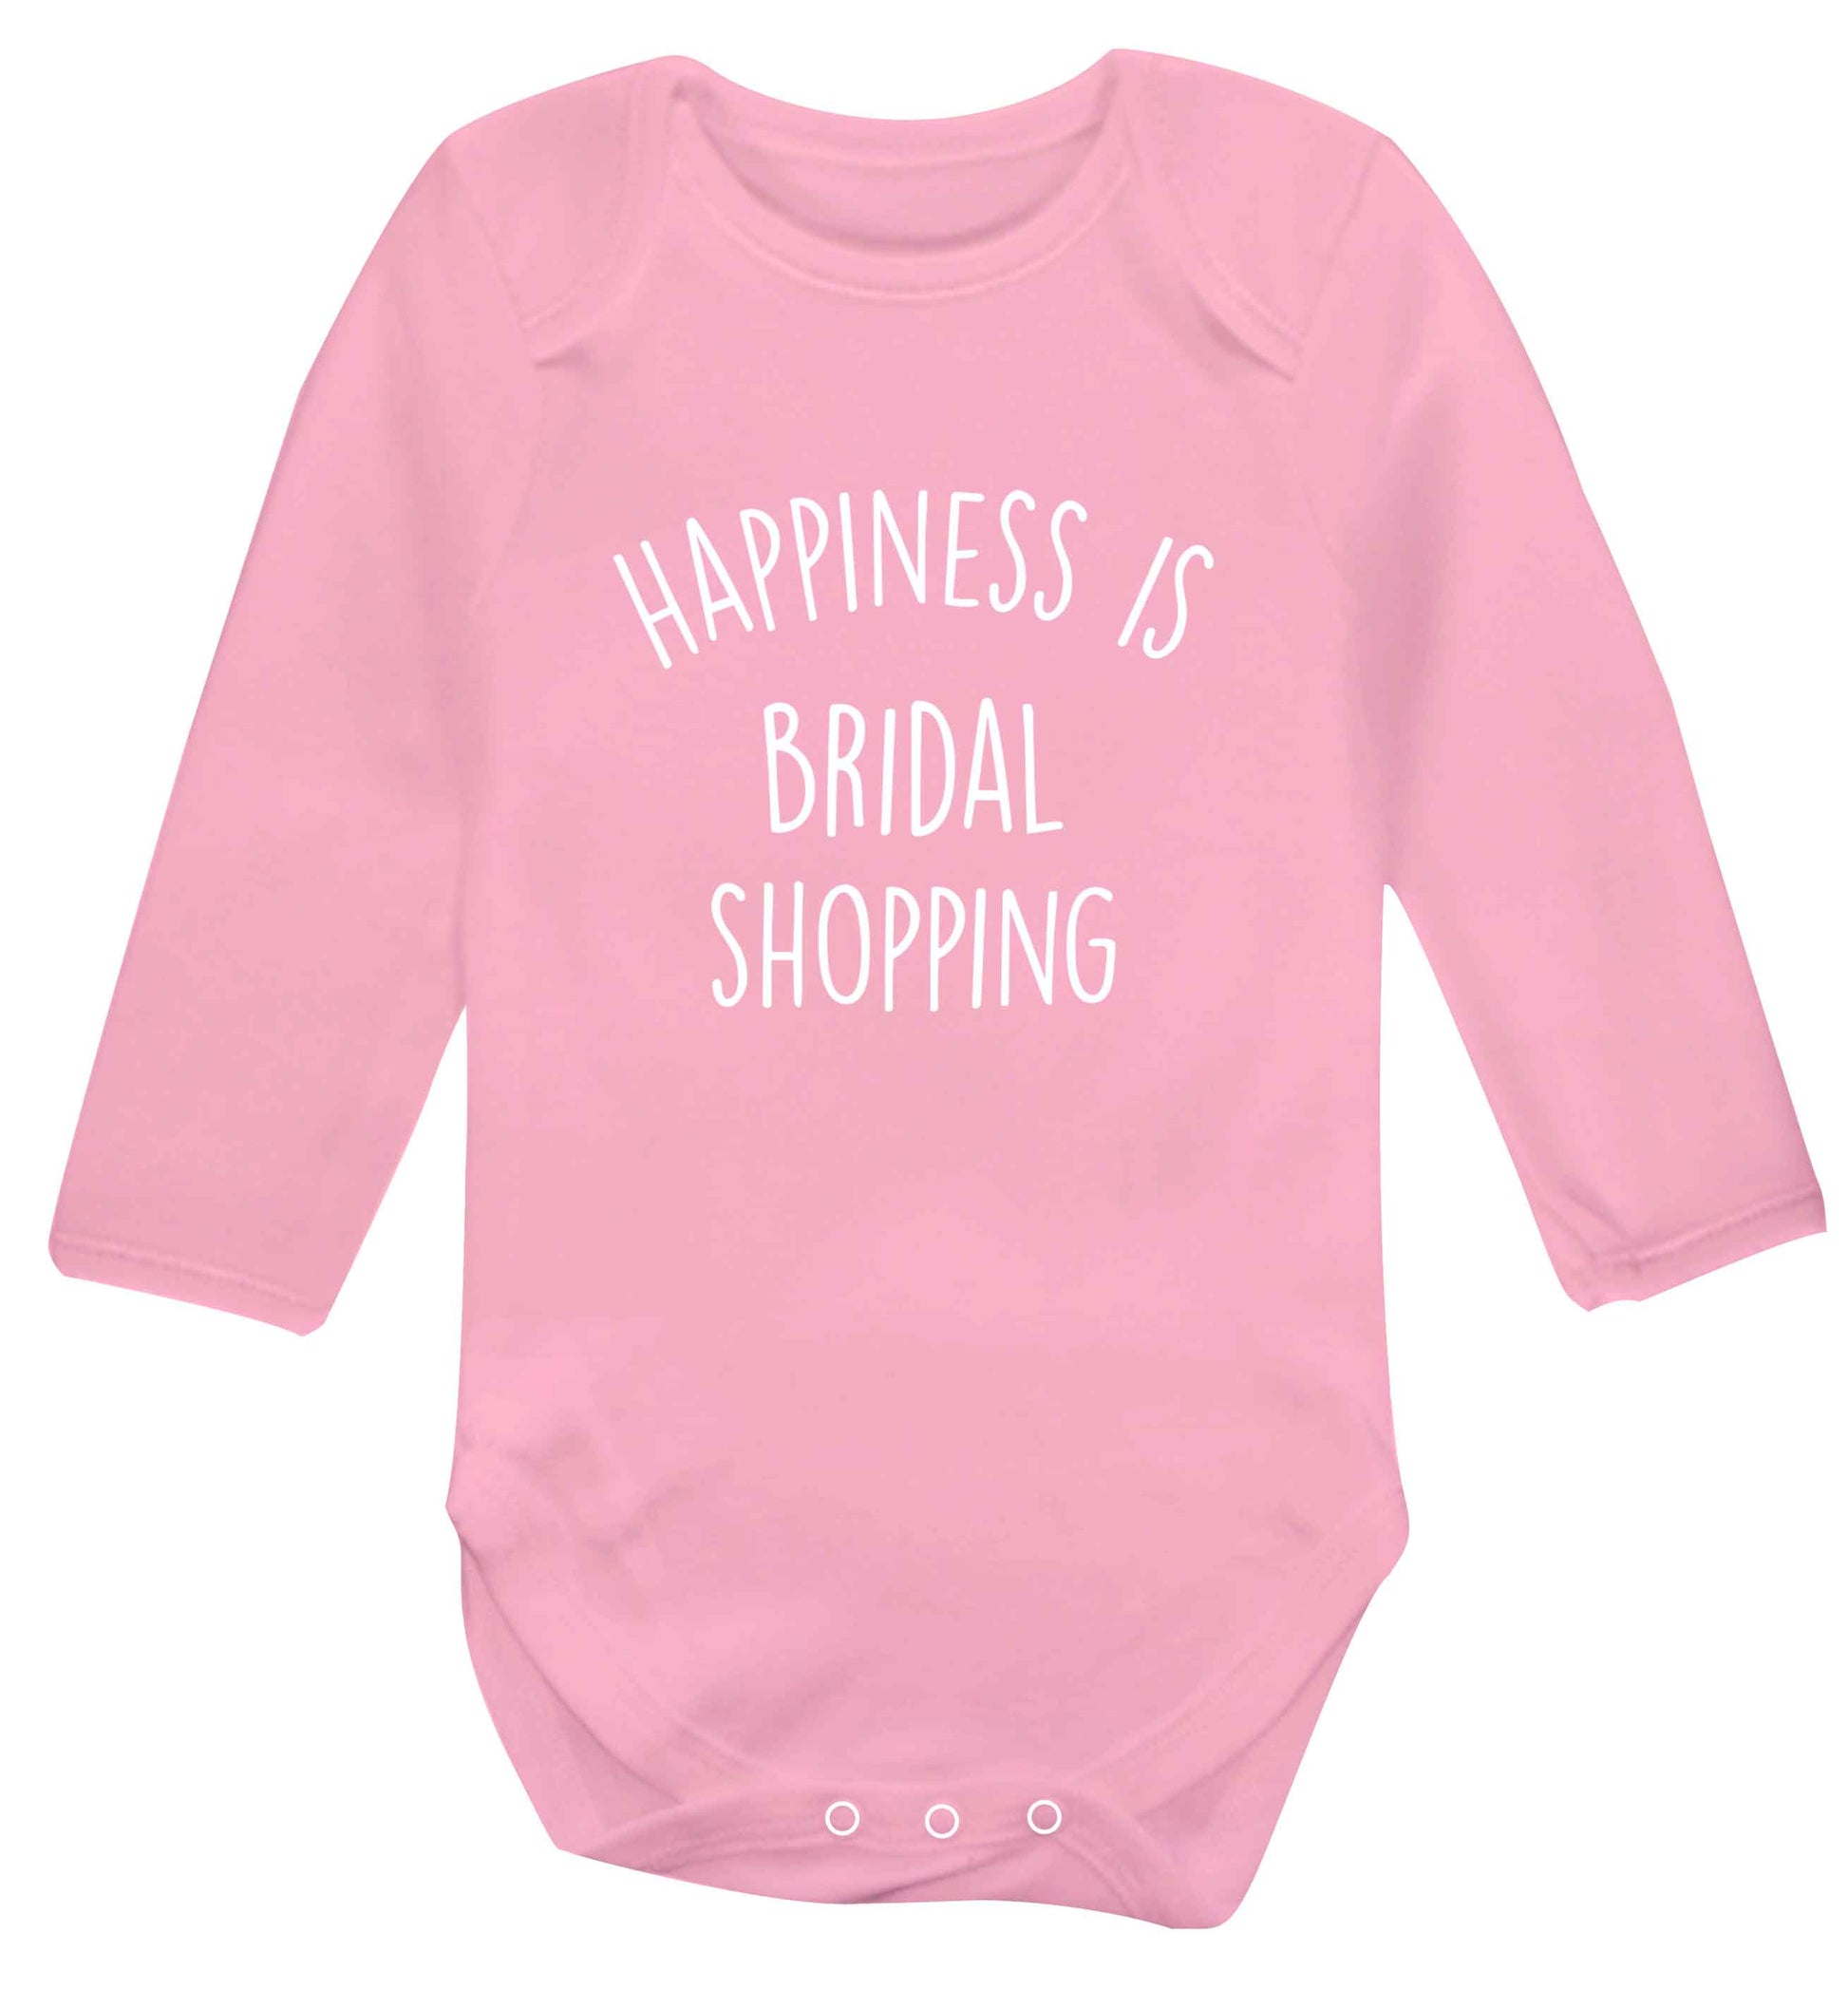 Happiness is bridal shopping baby vest long sleeved pale pink 6-12 months